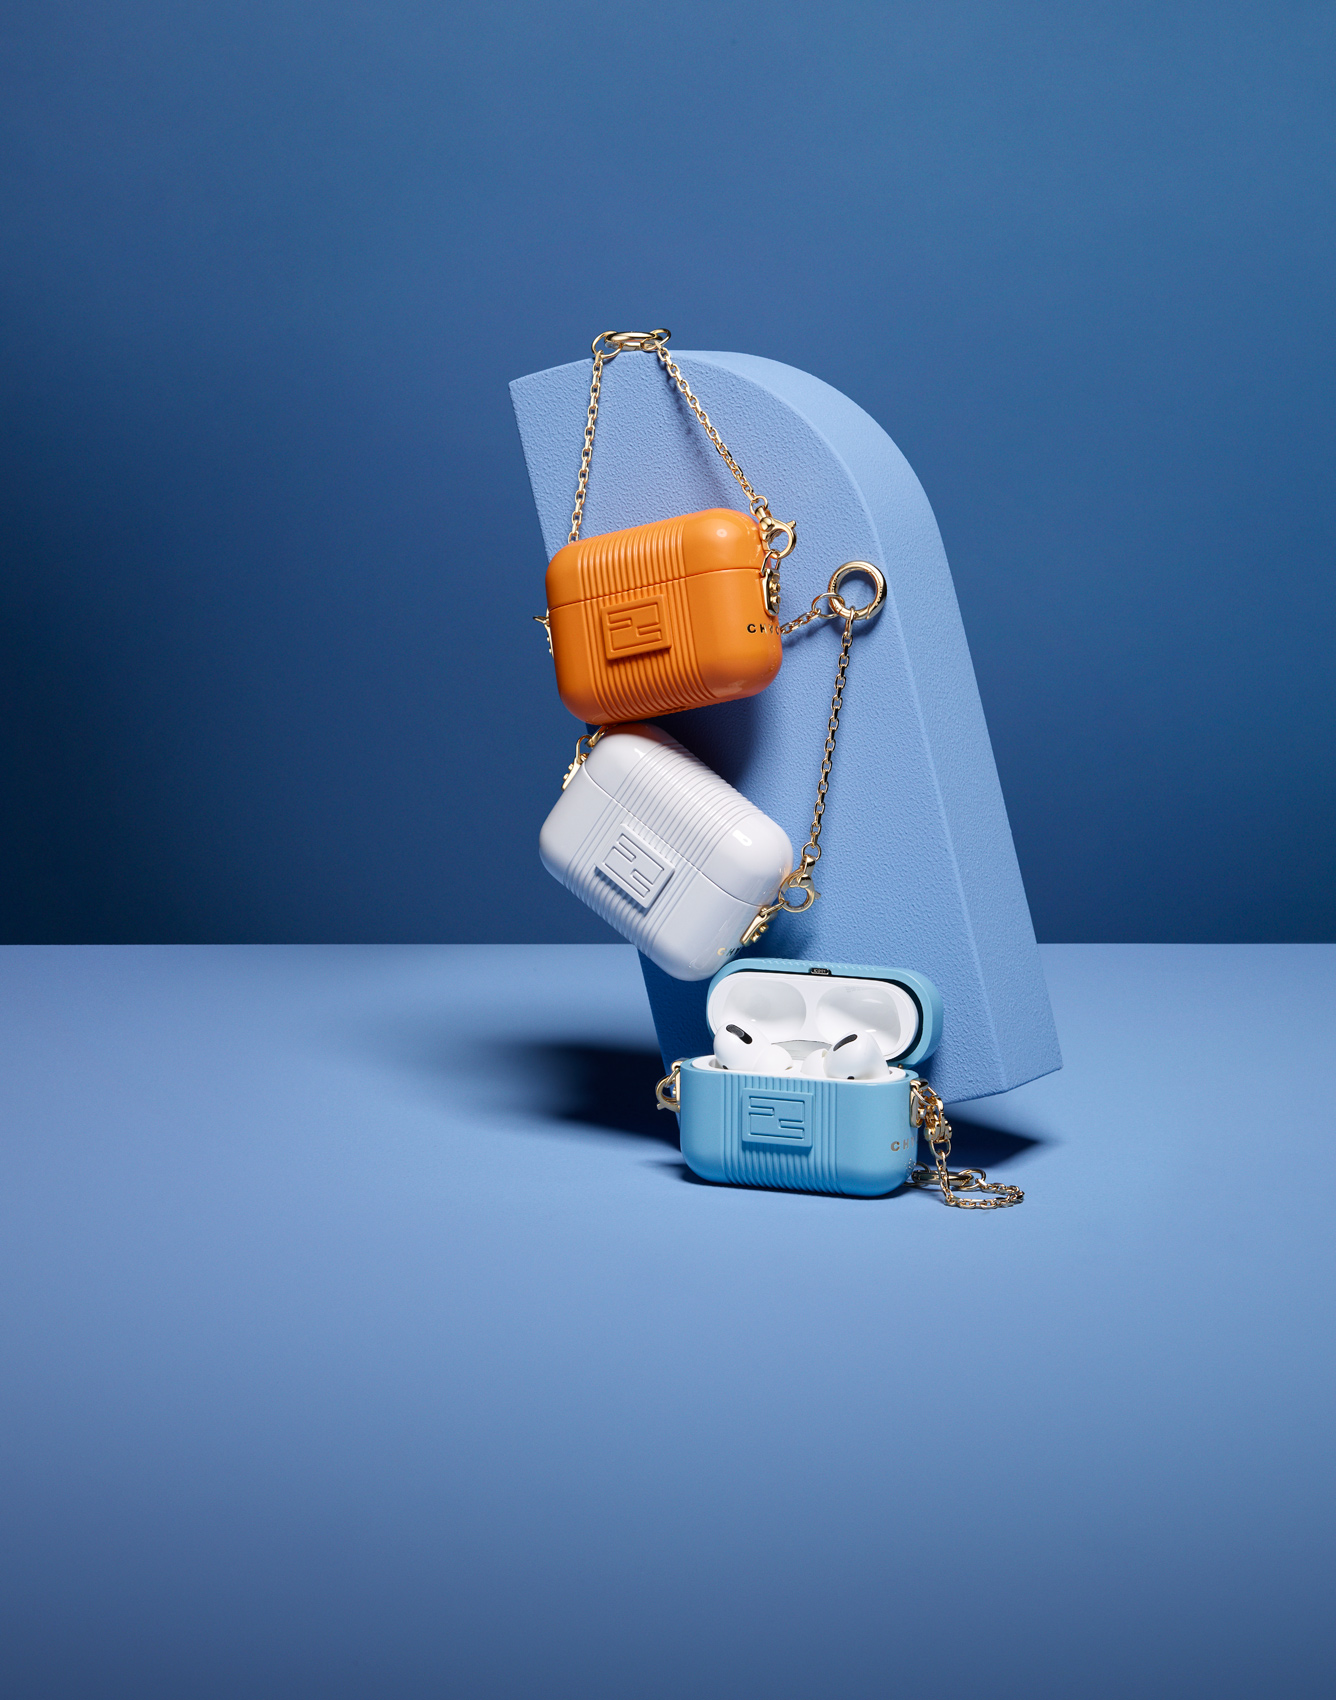 Apple products photography by Alexander Kent London based still life and product photographer.